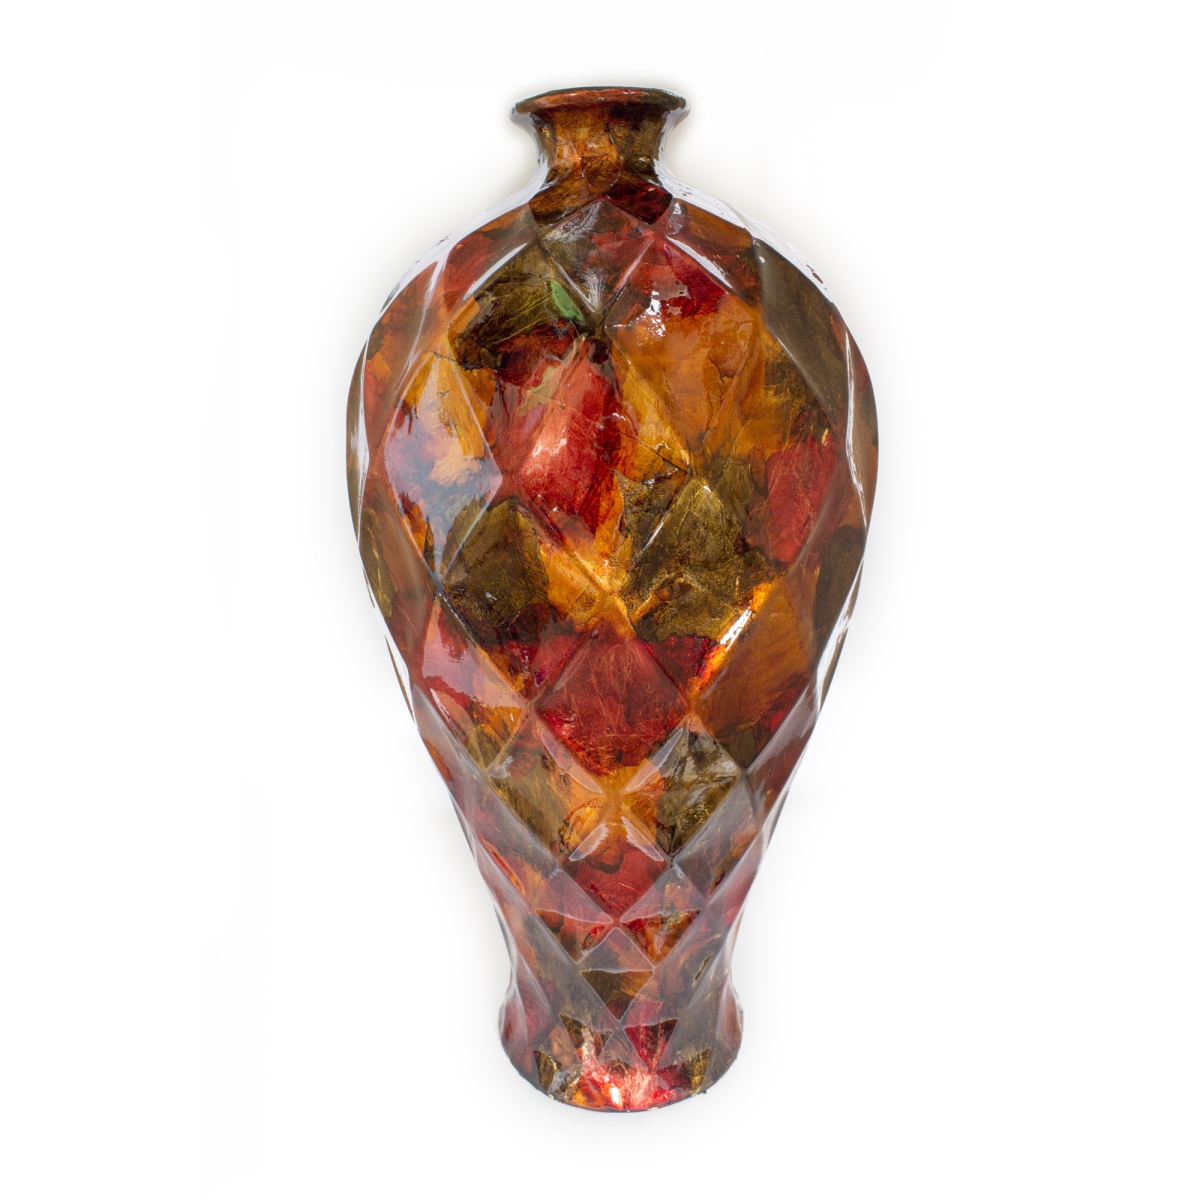 W1273-06 20 In. Tinsley Foiled & Lacquered Floor Vase - Copper, Red & Gold